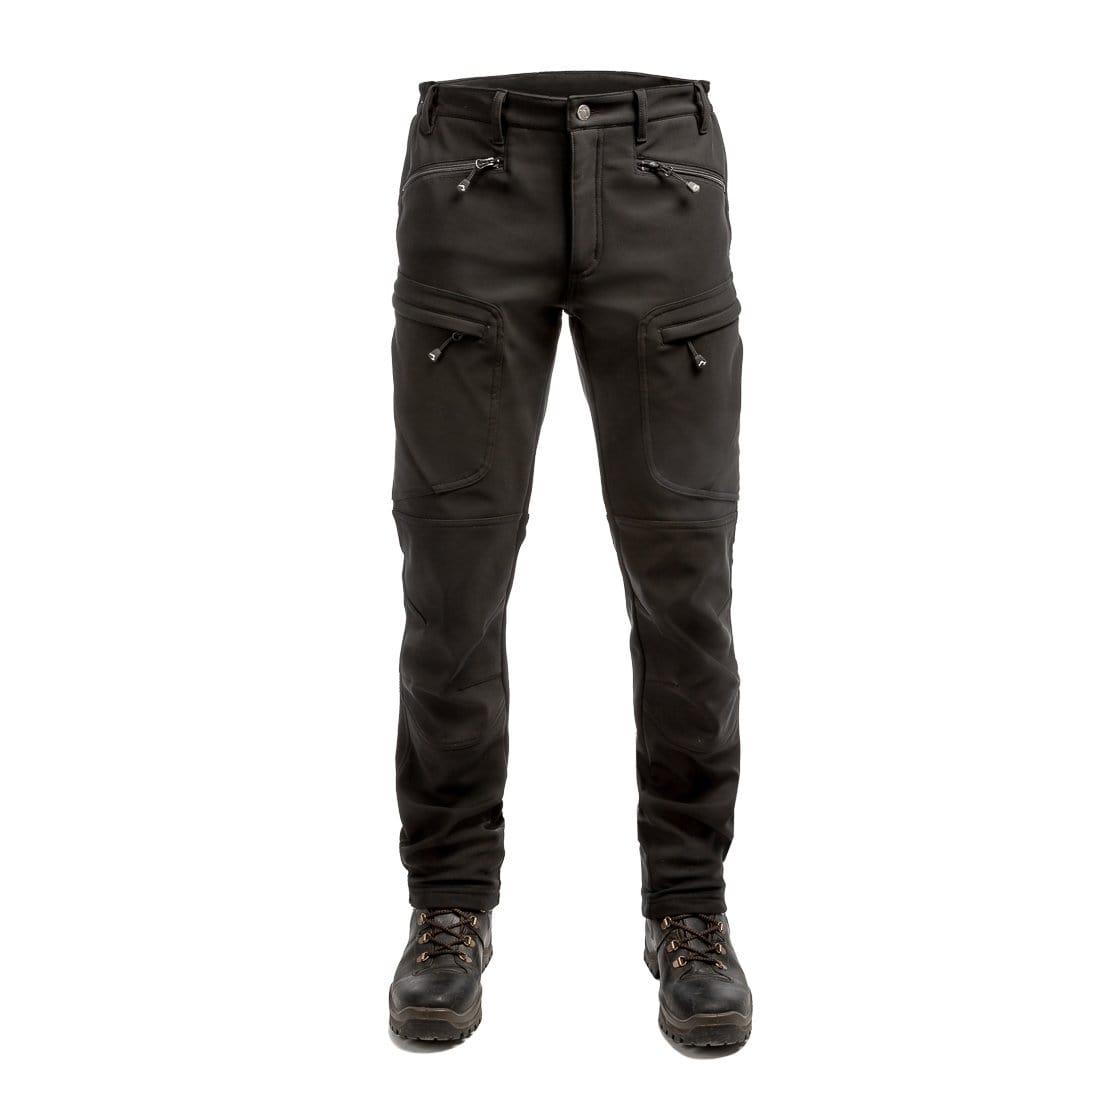 Buy Excellent Quality Thermal Lined Action Trousers W 30-48 with Zip  Pockets Side Cargo Pocket and Elastic Sides Elasticated self Adjust Pants  Bottoms Outdoor Work Walking Black Fleece Warm Winter Online at